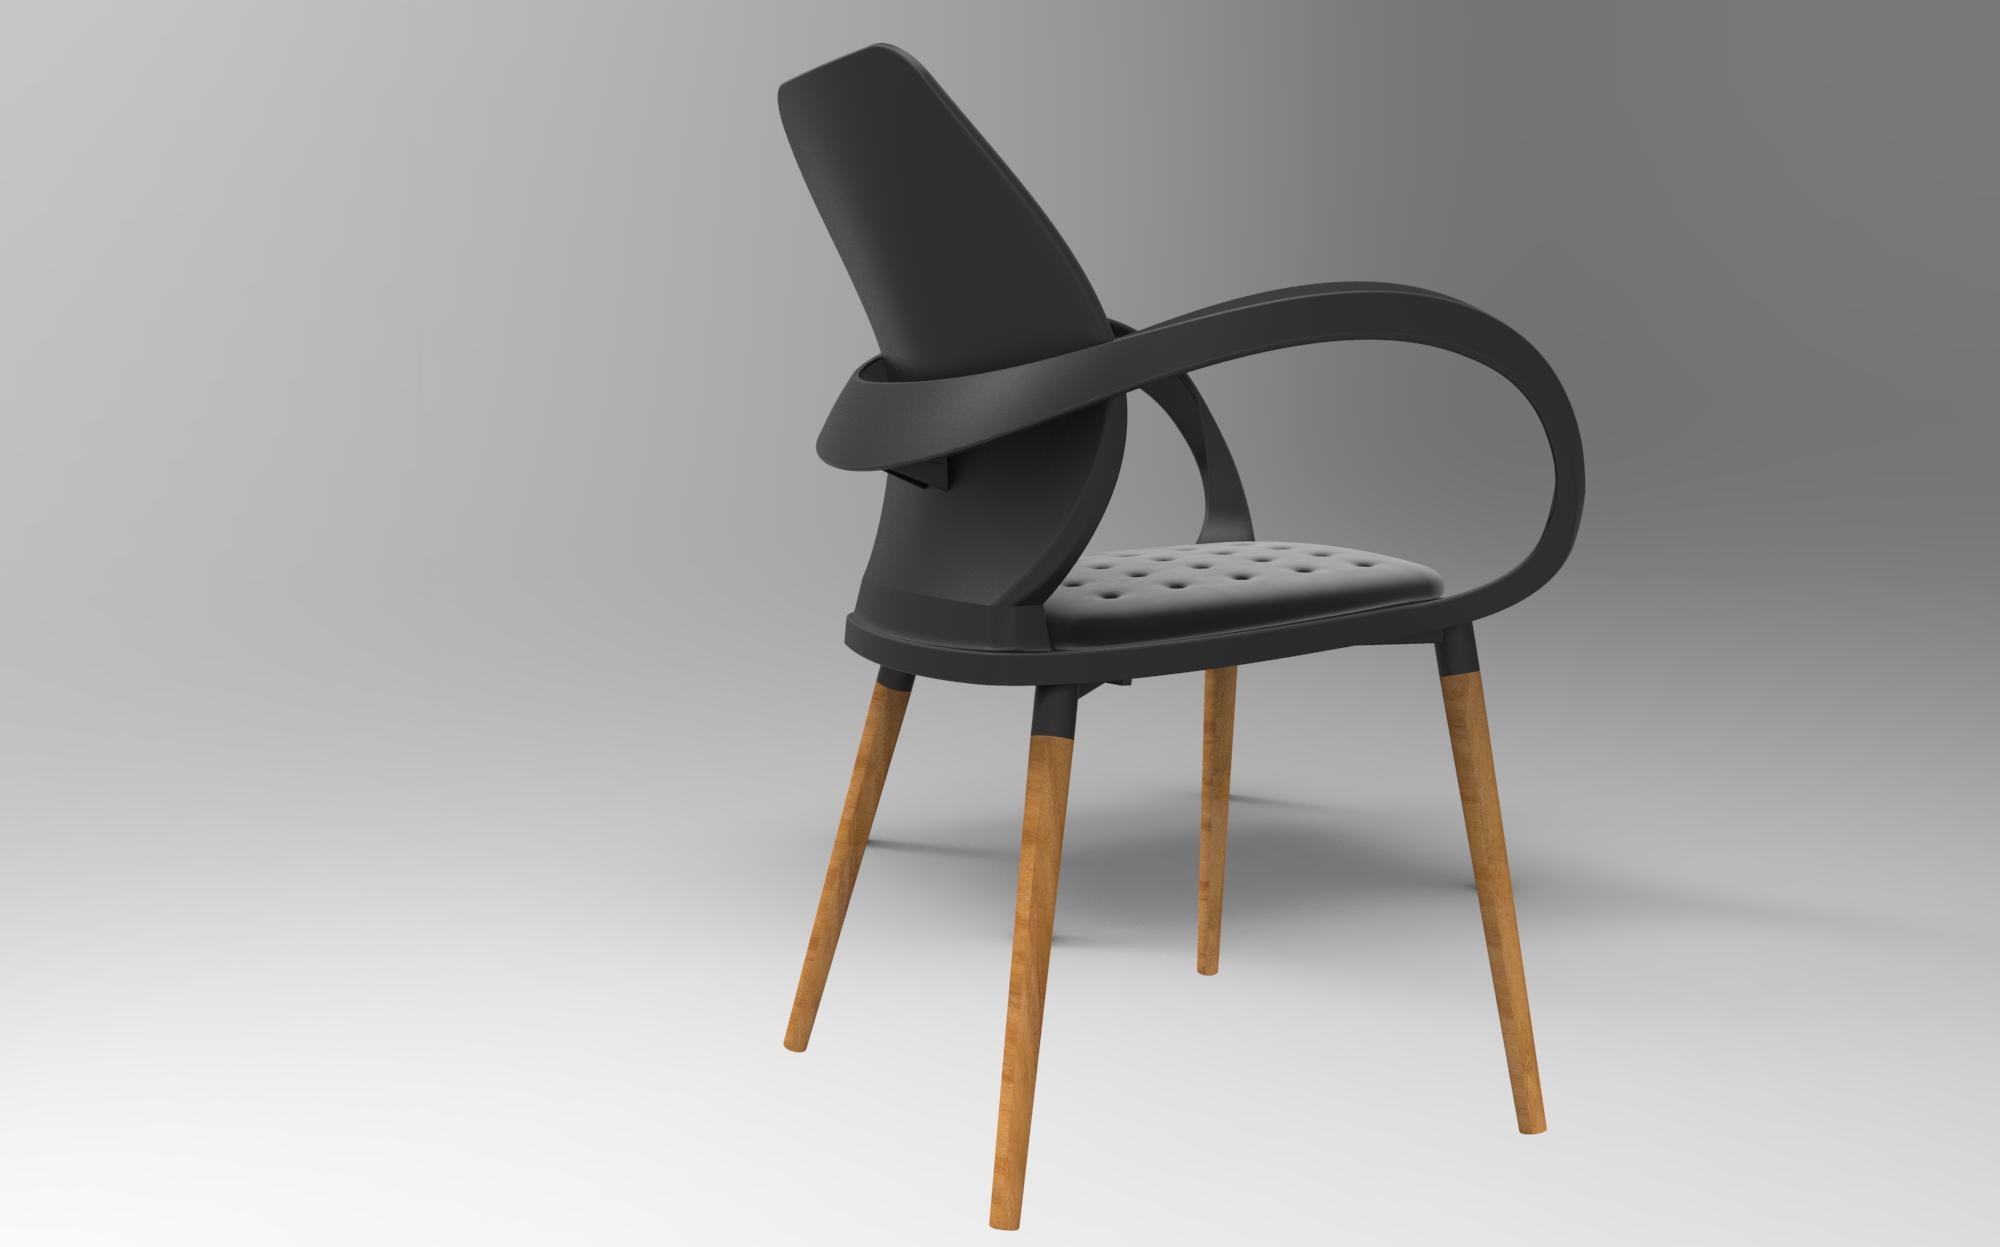 Modern Wooden Base Guest Chair with Plastic Armchair (Hy-L300pw)